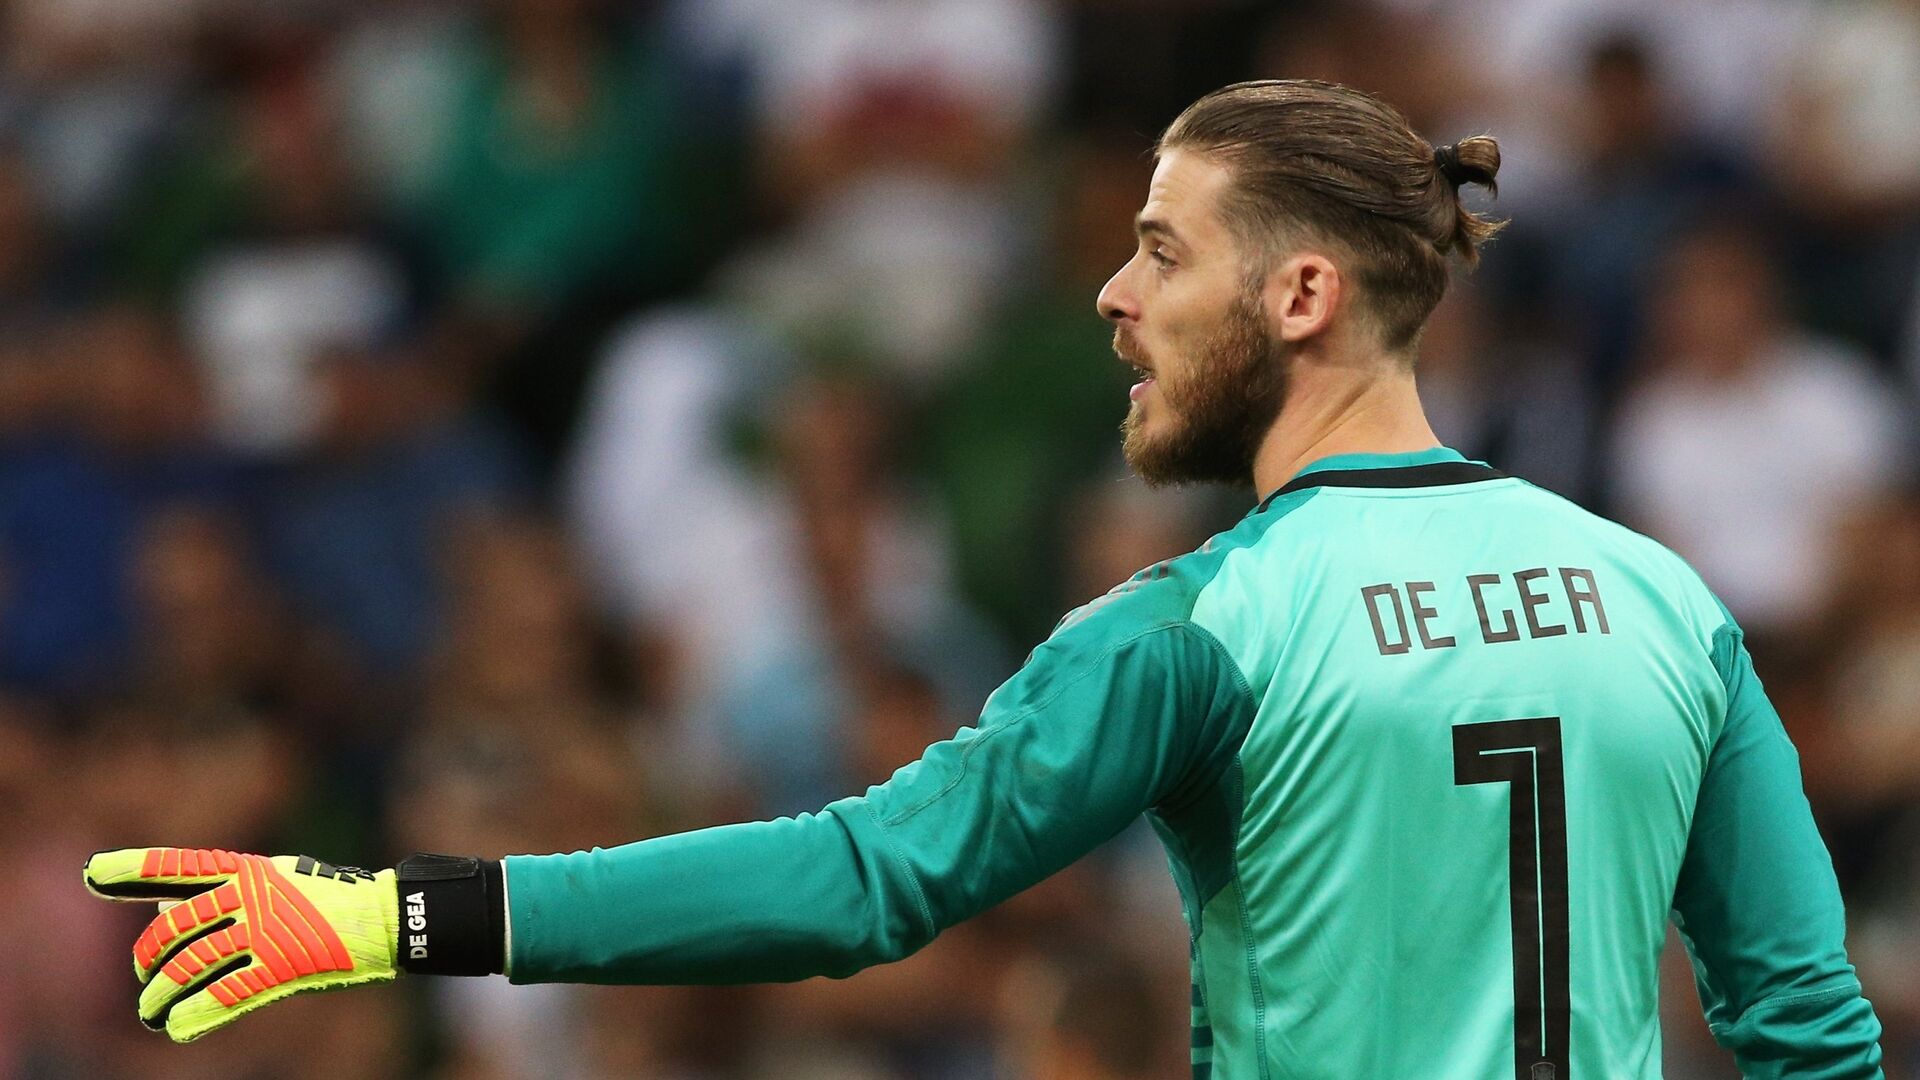 Spain's goalkeeper David de Gea points during a friendly match between Tunisia's and Spain's national soccer teams ahead of the World Cup in Krasnodar, Russia, June 9, 2018 - اسپوتنیک افغانستان  , 1920, 02.07.2022